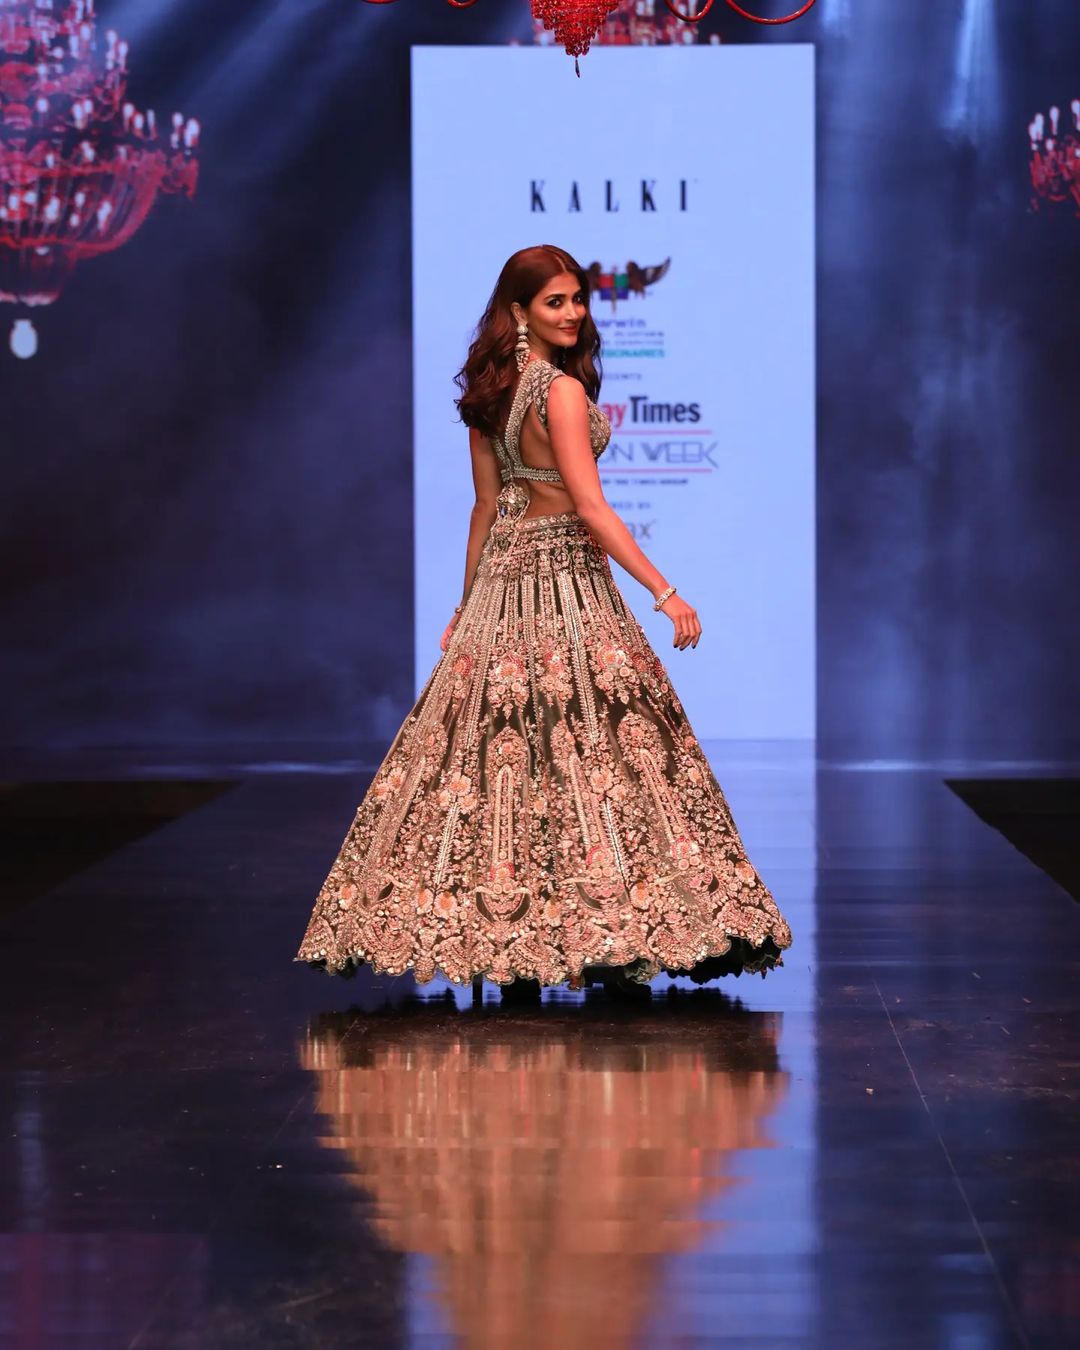 As a showstopper, Pooja Hegde walks the runway for Kalki Fashion